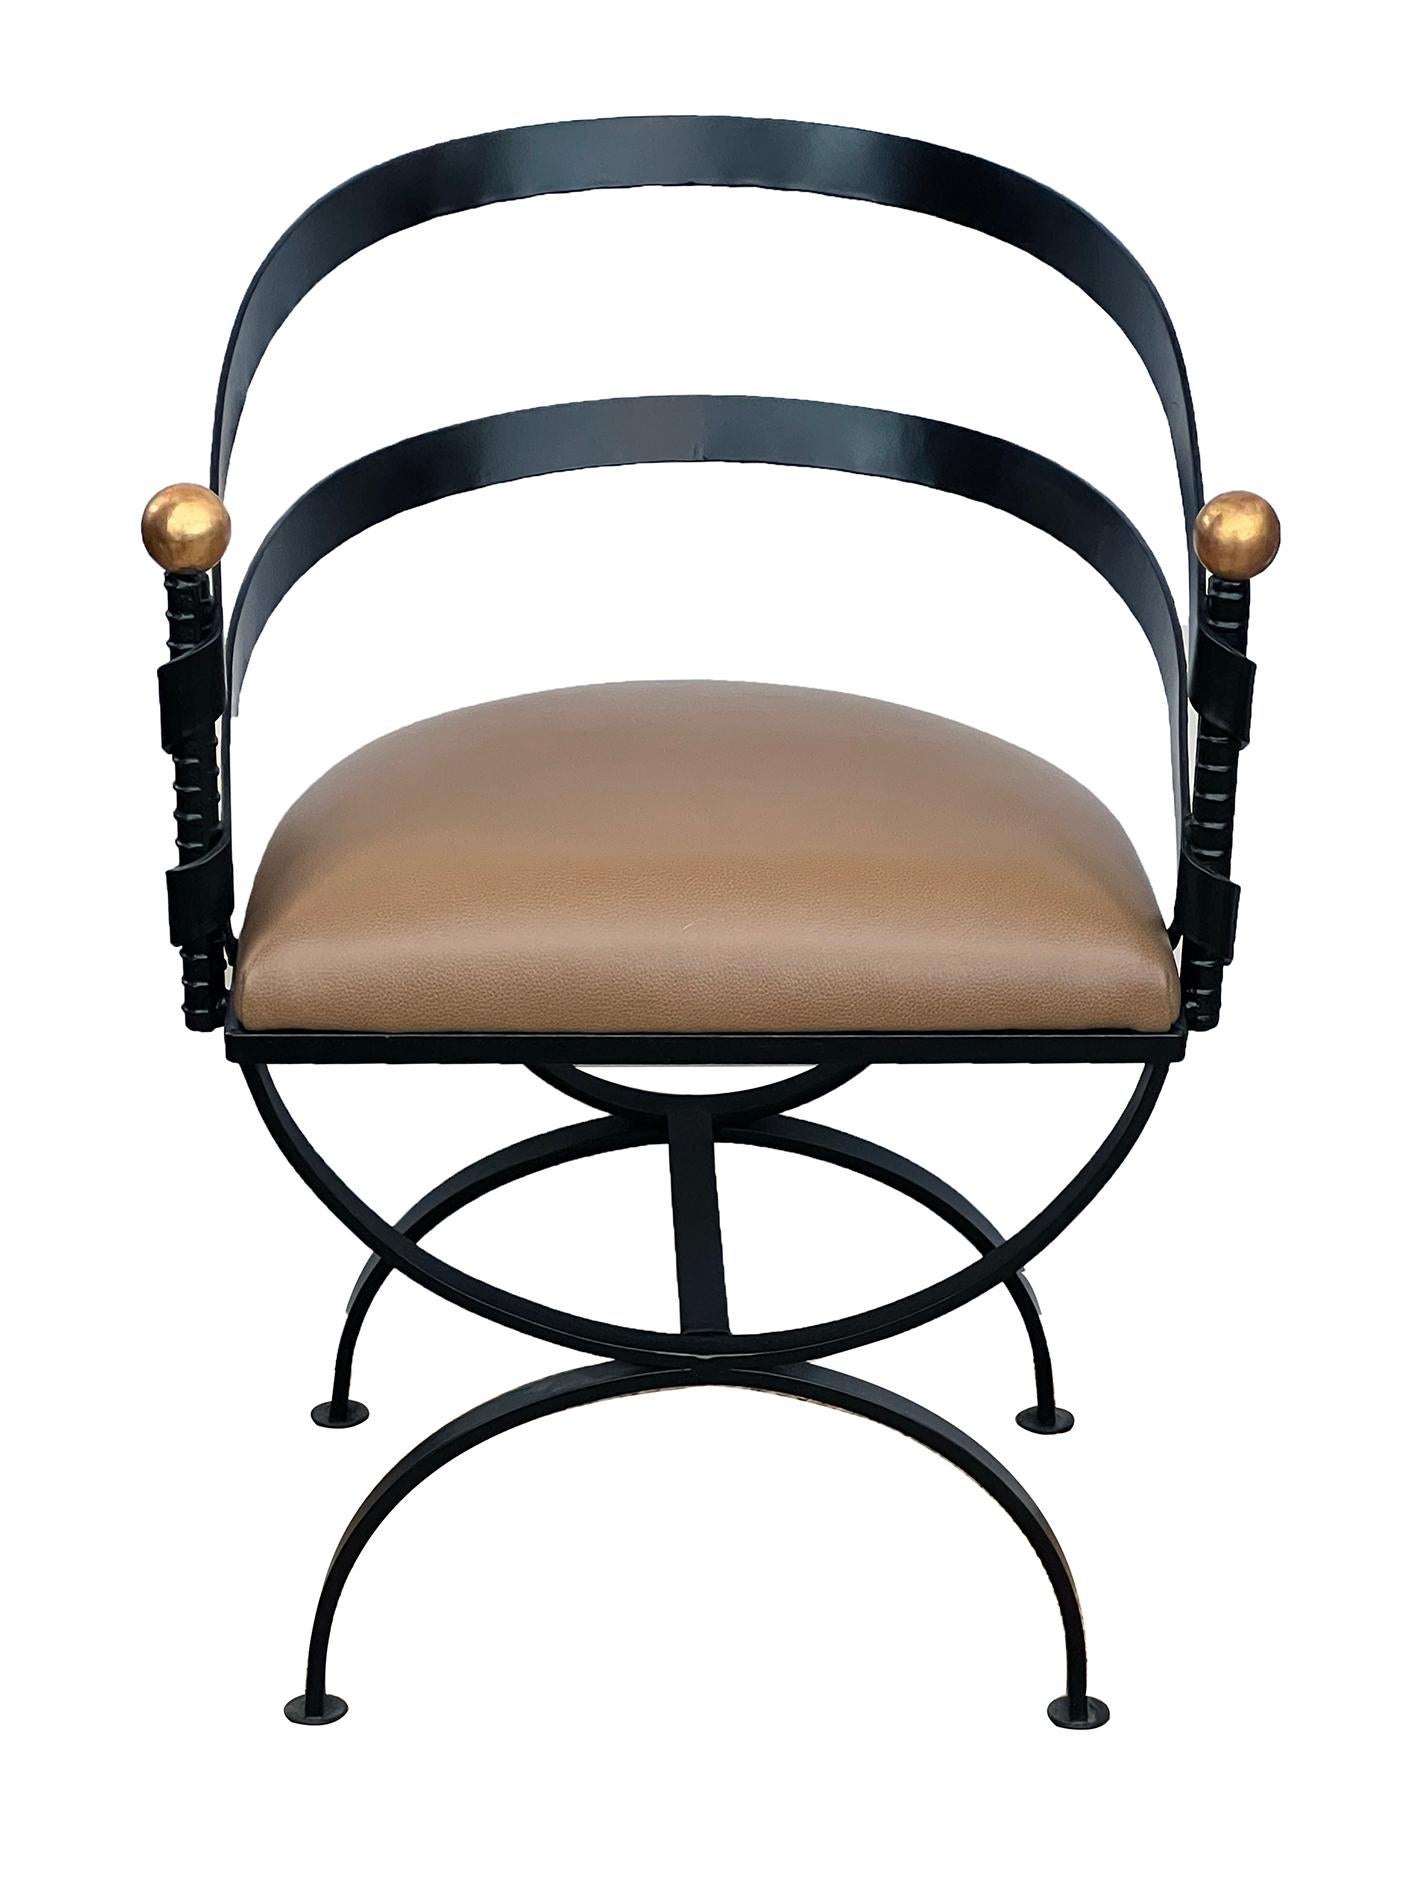 each with dramatic incurved openwork back sloping to upright teminals capped with giltwood spheres; flanking an attached leather seat all raised on a curule-form support